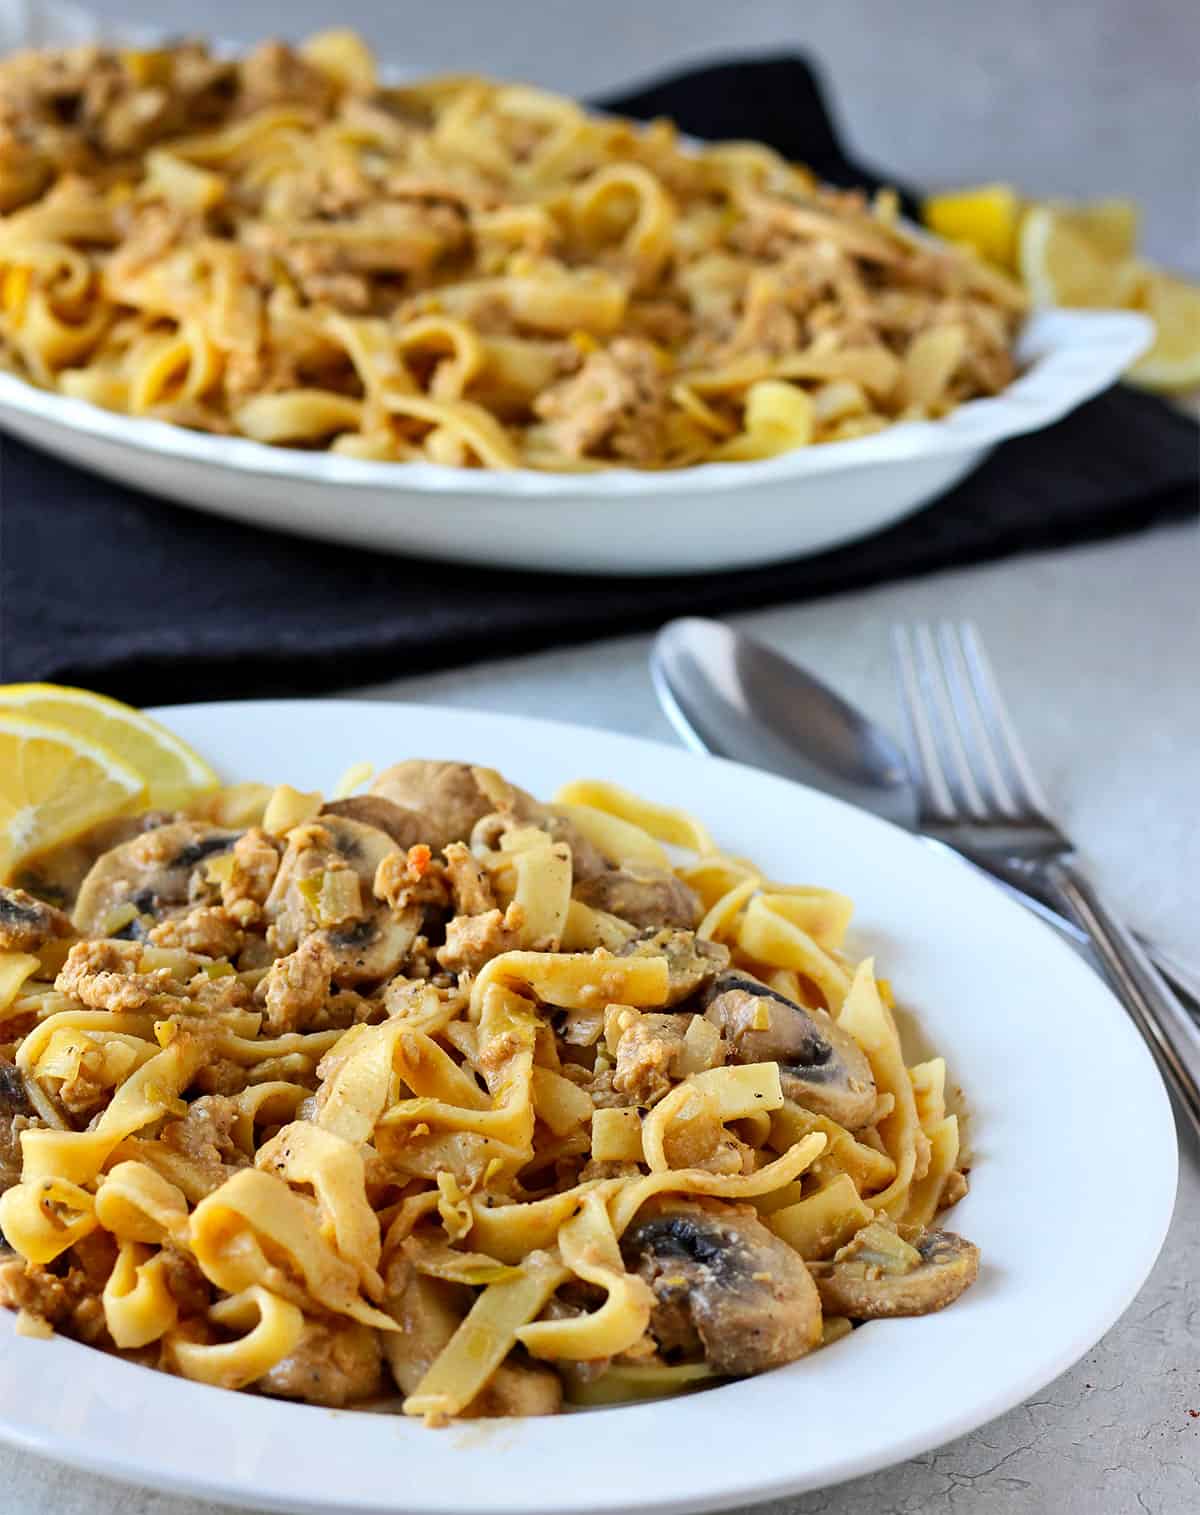 A bowl of mushroom stroganoff with pasta noodles.